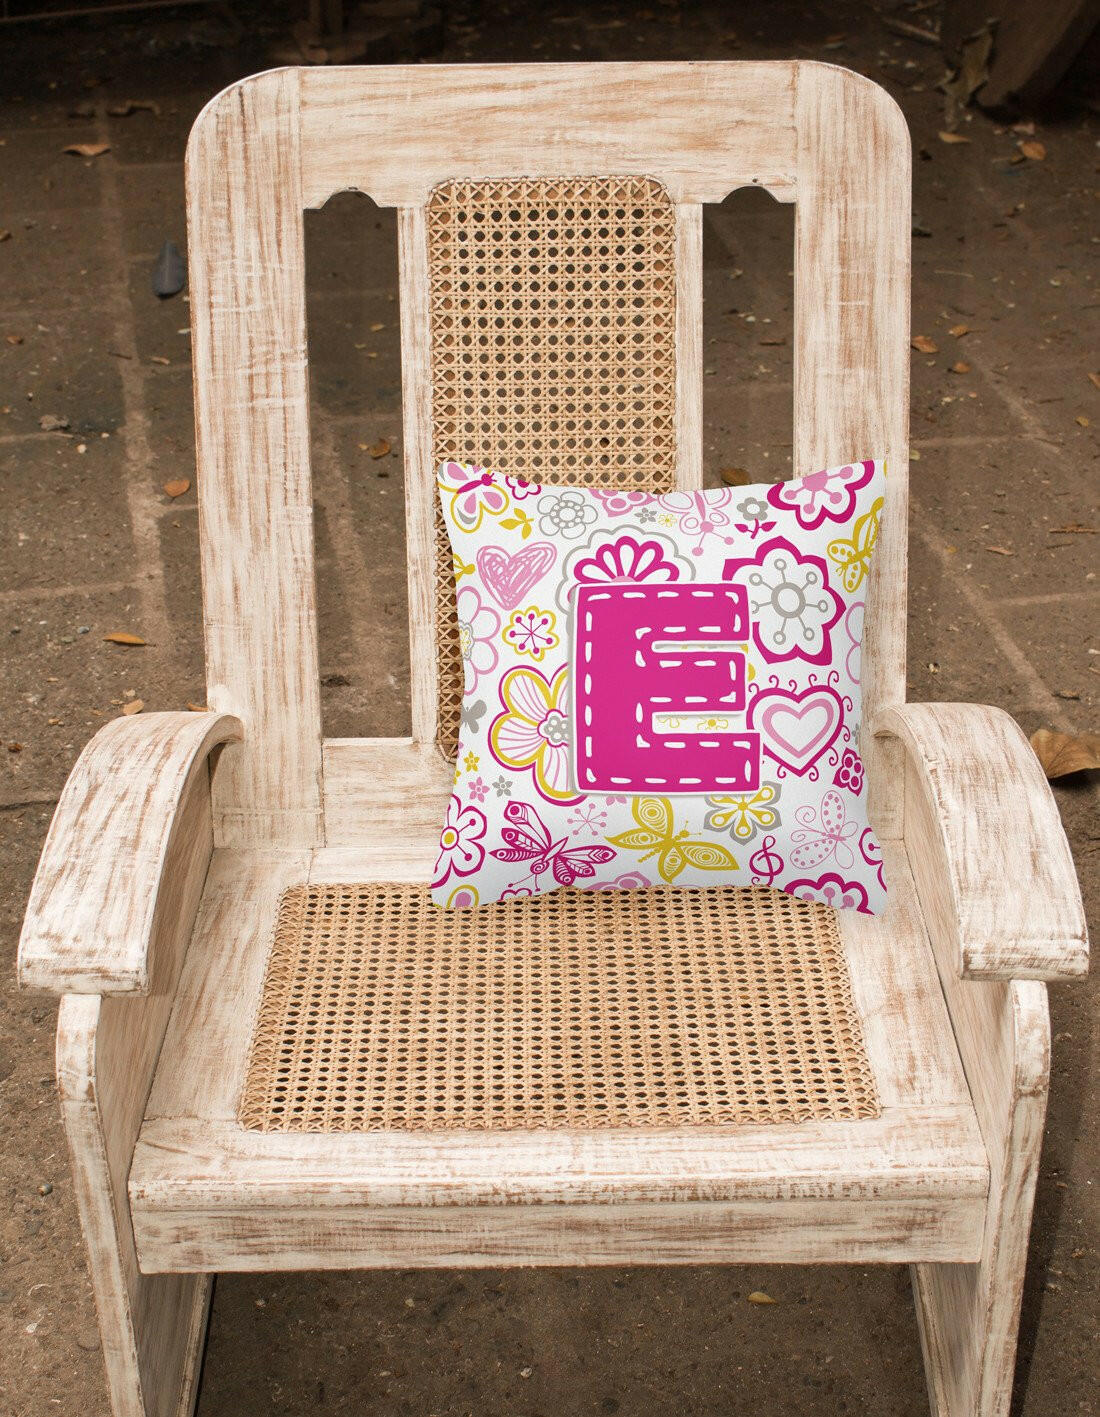 Letter E Flowers and Butterflies Pink Canvas Fabric Decorative Pillow CJ2005-EPW1414 by Caroline's Treasures